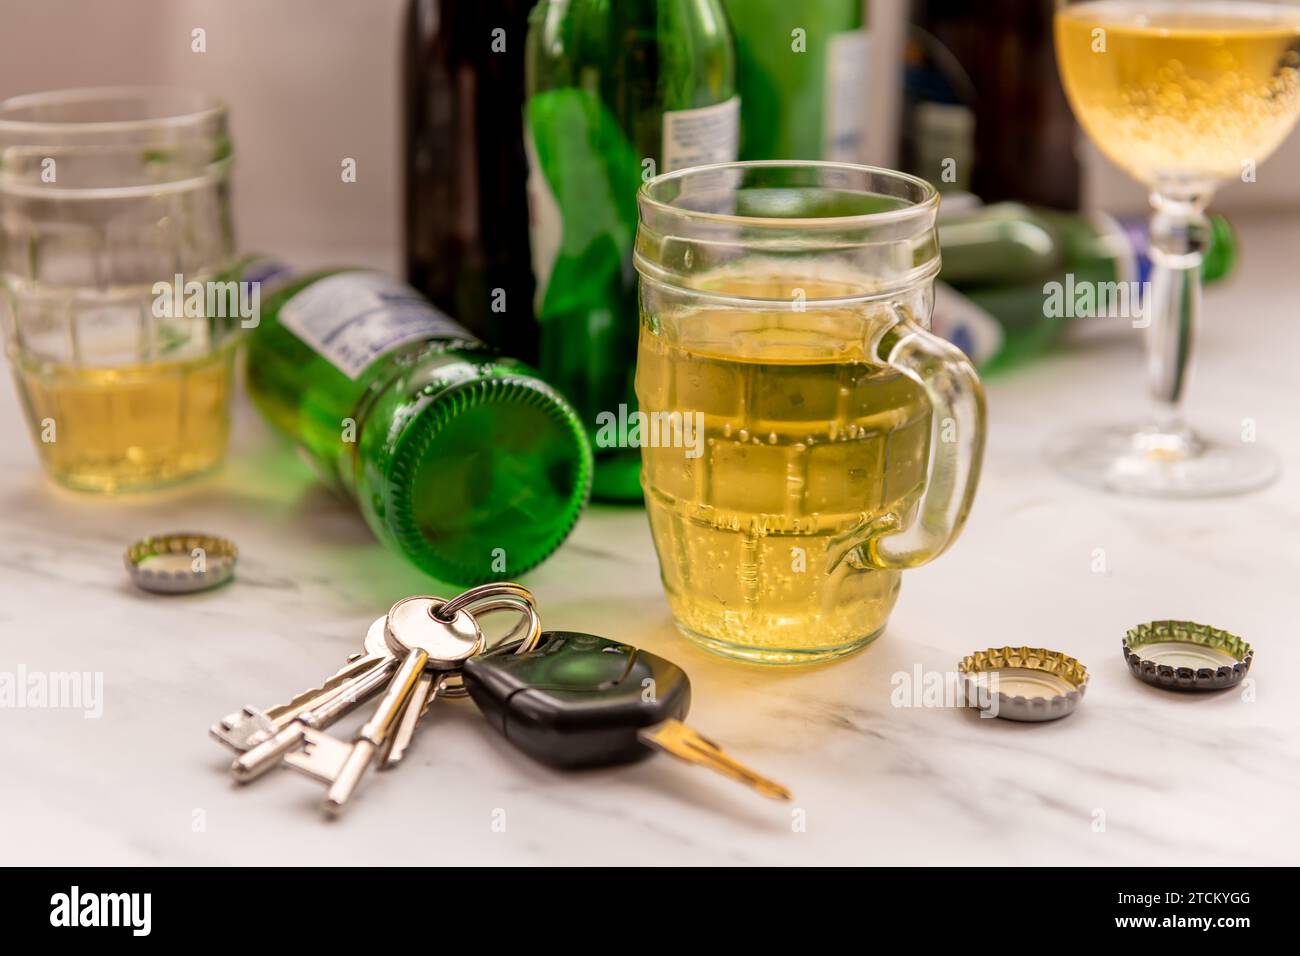 A set of car keys on a table full of glasses of alcoholic drinks and bottles. Drink driving concept. Stock Photo